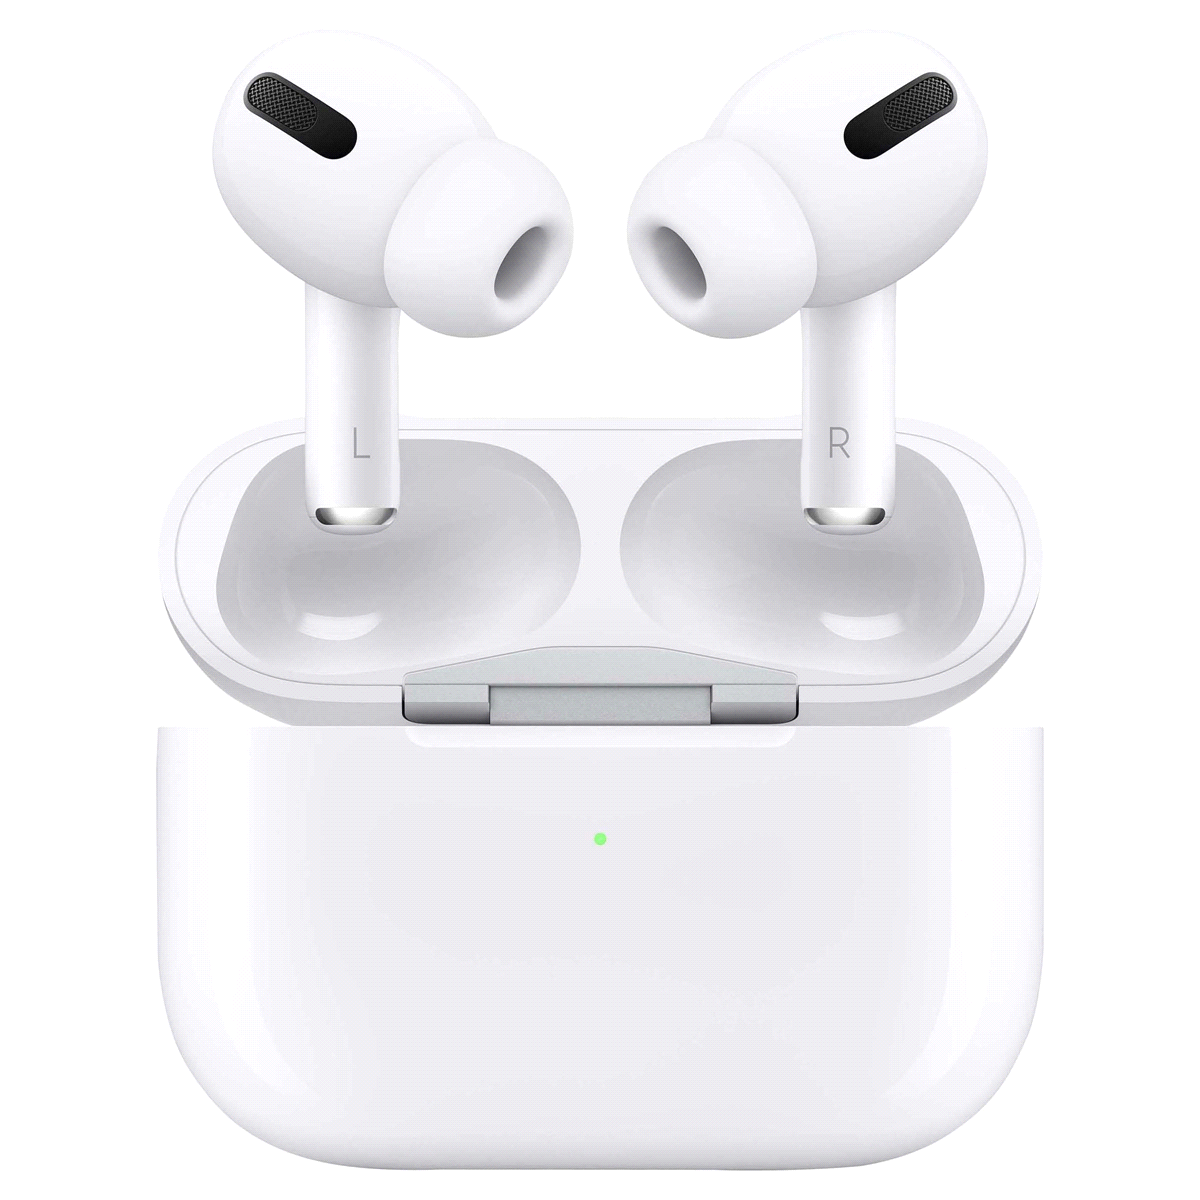 air pods pro with wireless charging case - $144 only at Meijer